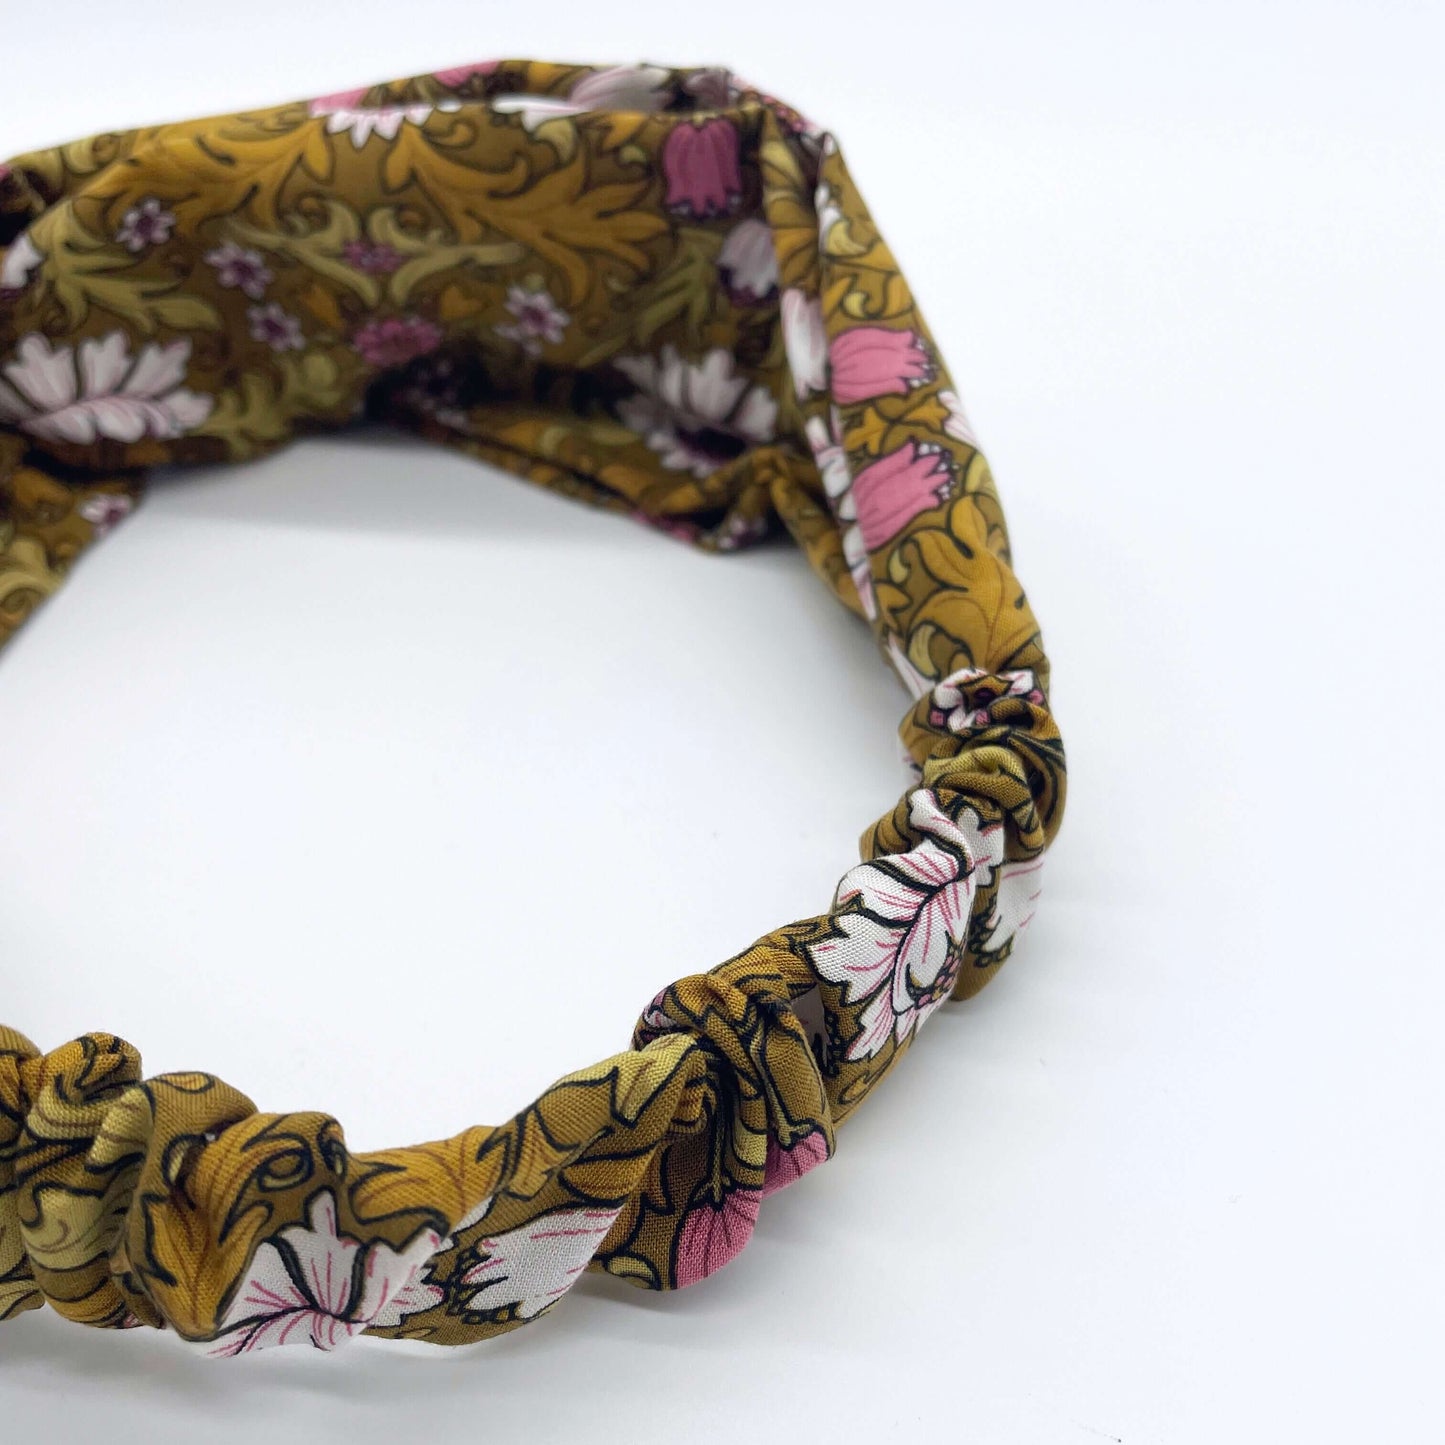 William Morris- Inspired Twist Headband in mustard yellow with flowers and leaves print